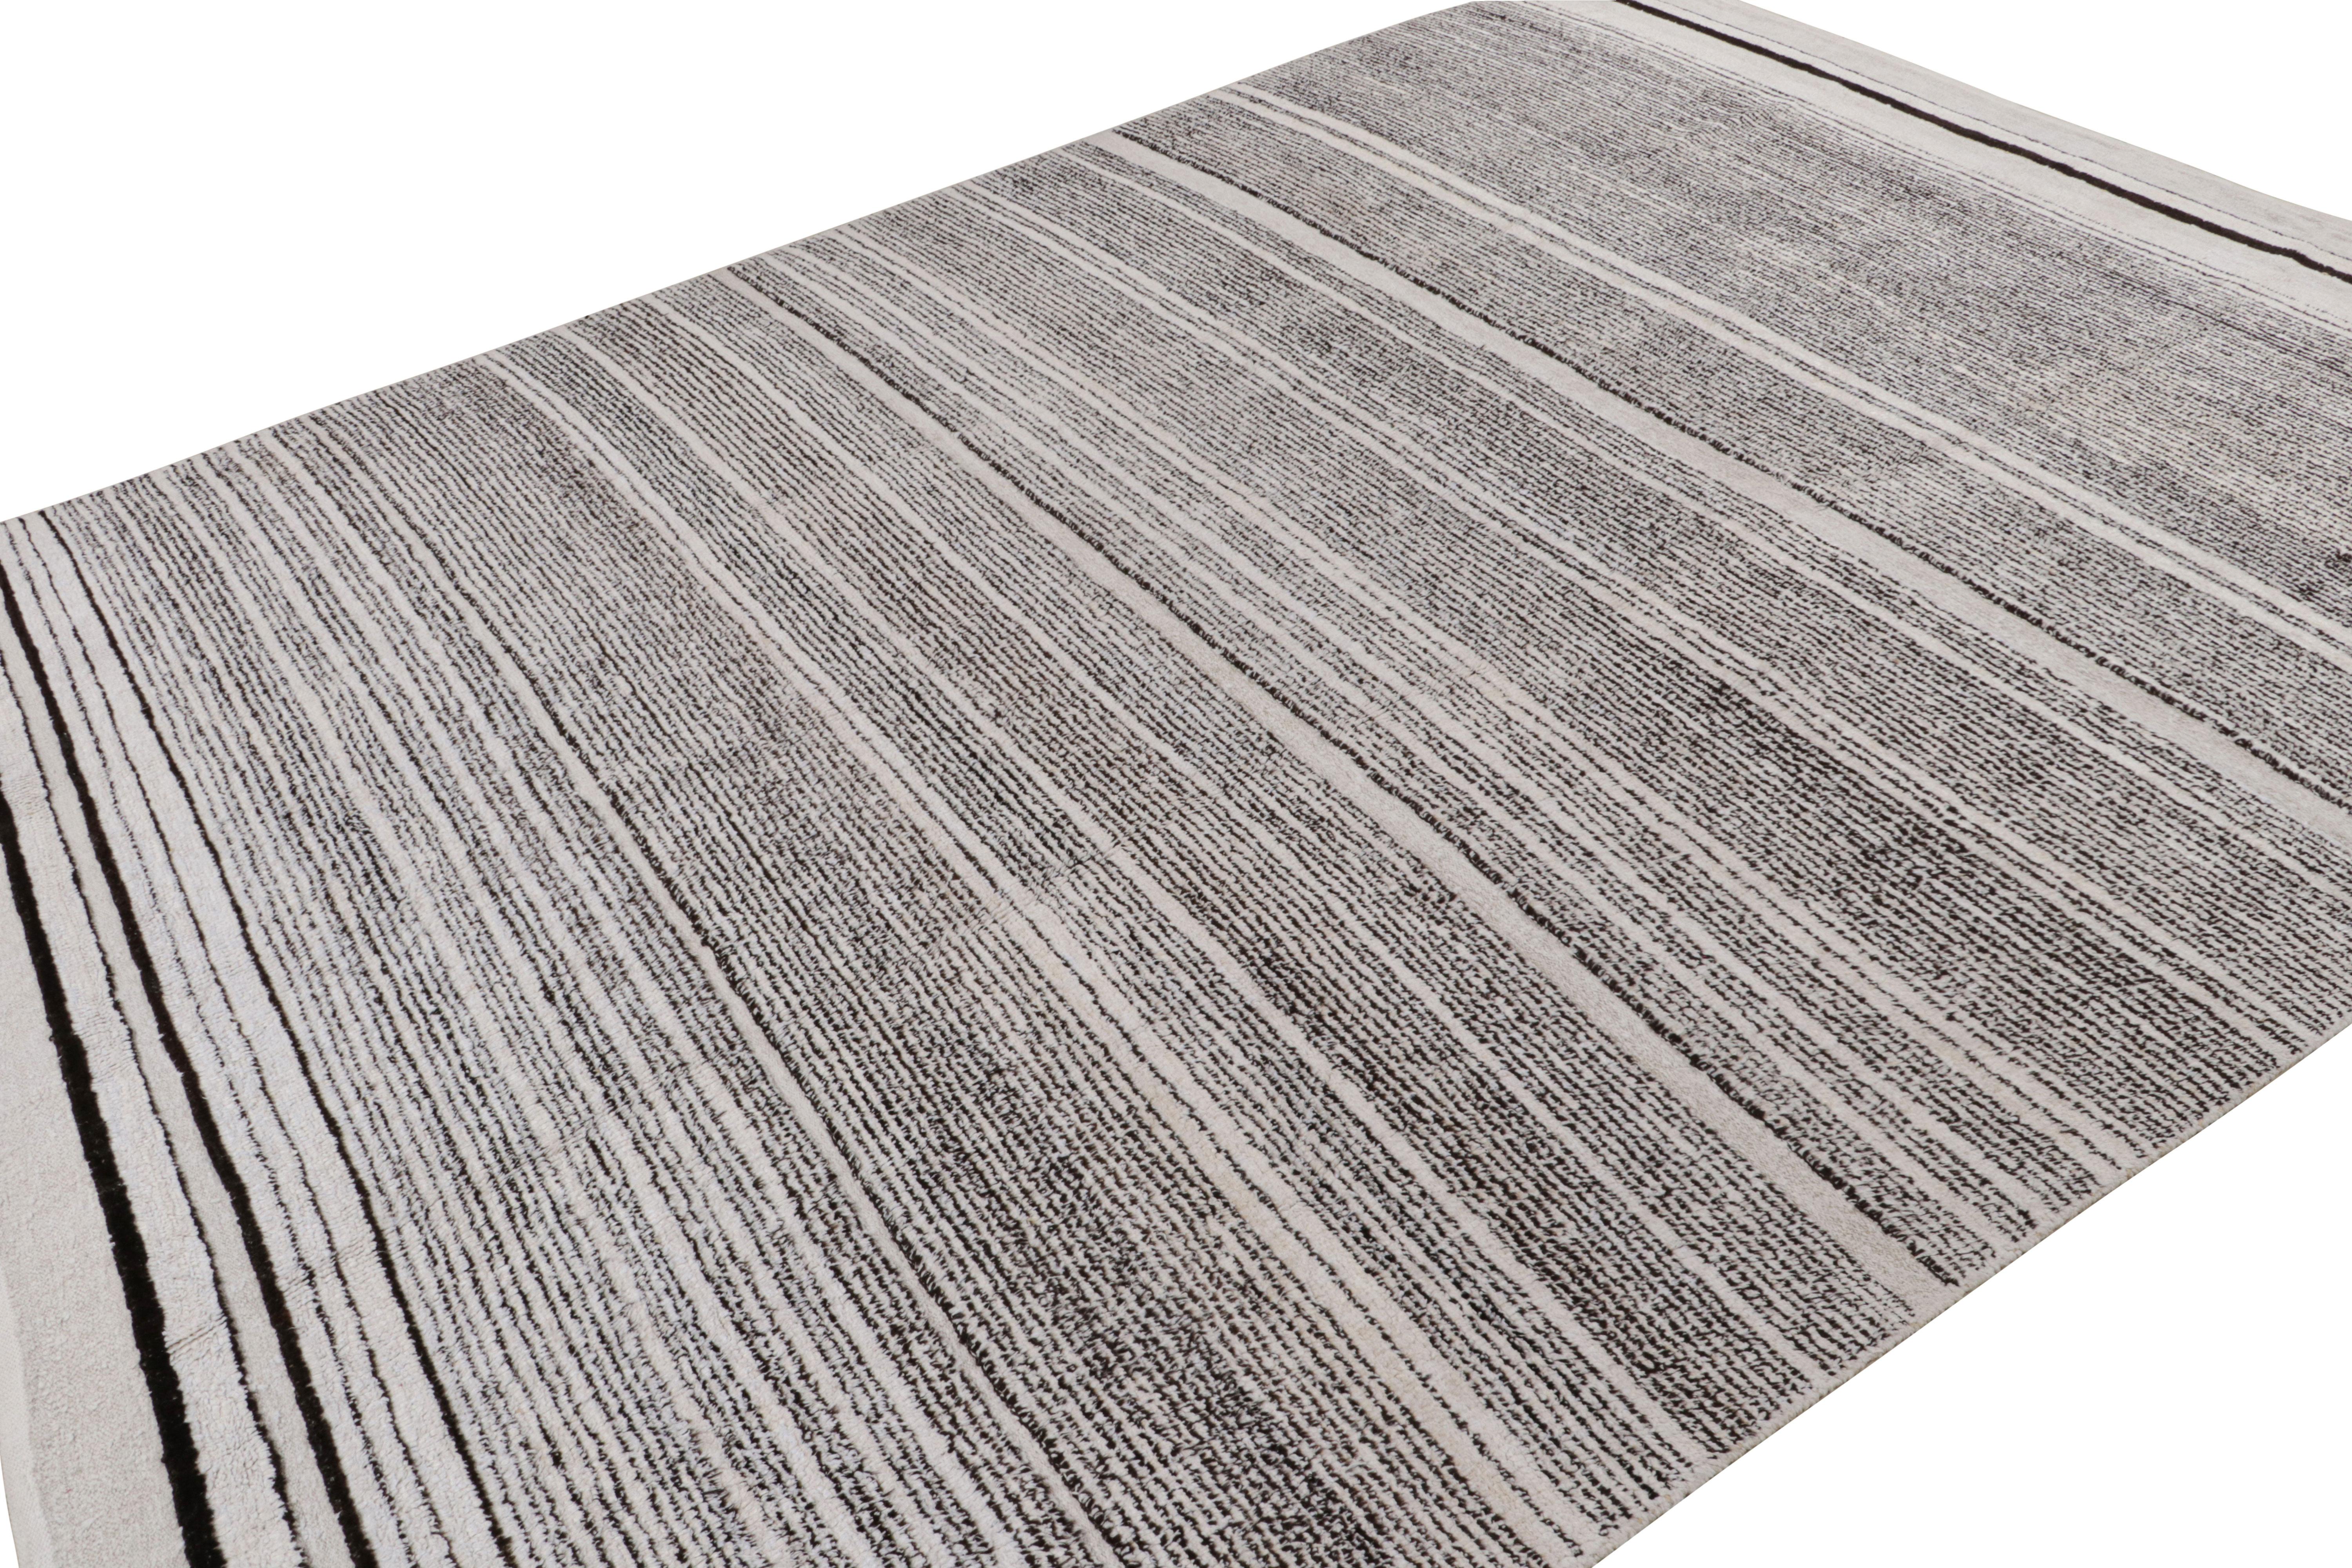 Hand knotted in wool, this 9x12 contemporary rug “Sky” features geometric stripes, and is more emphatic of the gradation theme. 

On the Design:

Admirers of the craft and keen eyes will note a take on gradation in this piece—a subtle yet tasteful